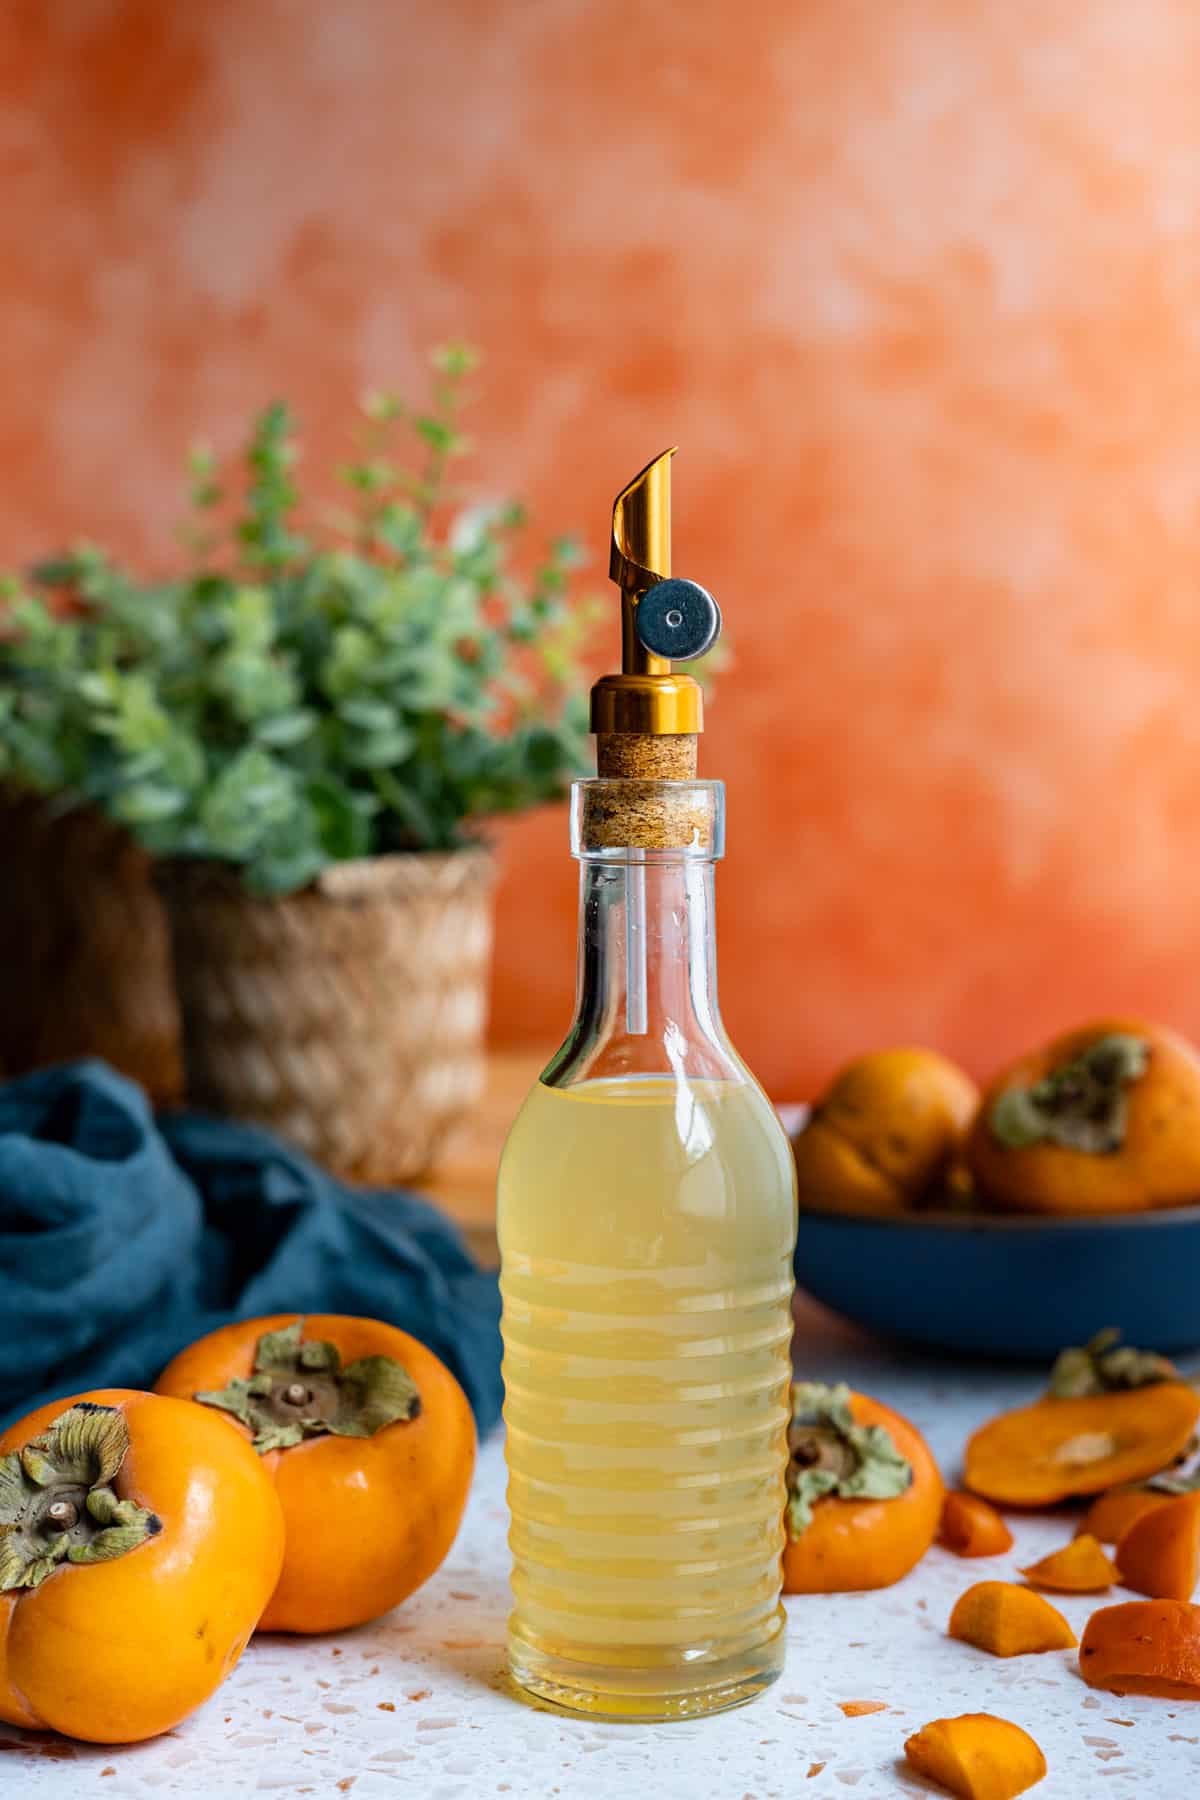 A bottle of persimmon simple syrup sits on a countertop. There are whole and cut persimmons in the frame of the photo as well.